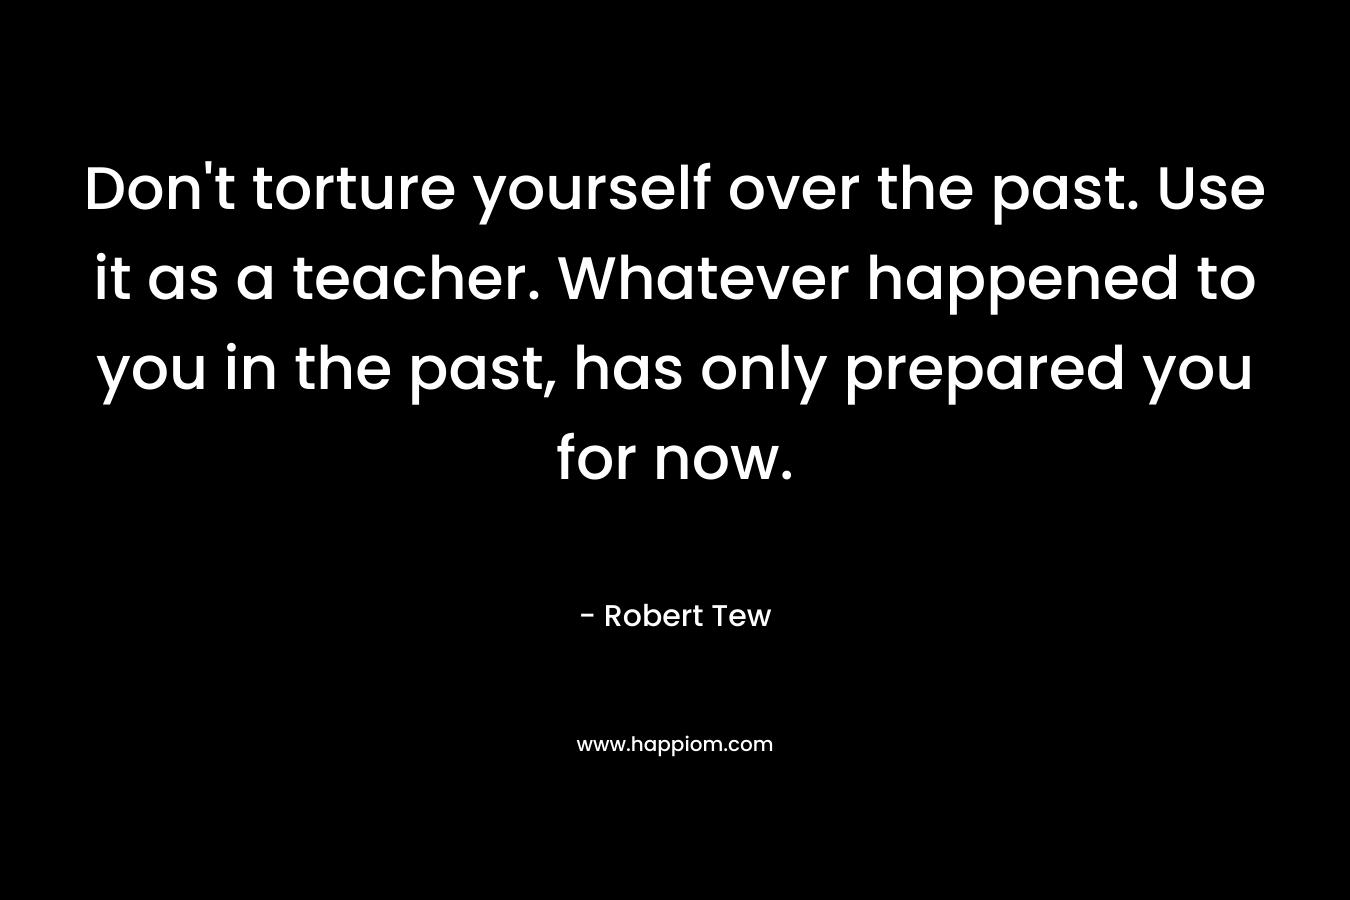 Don’t torture yourself over the past. Use it as a teacher. Whatever happened to you in the past, has only prepared you for now. – Robert Tew